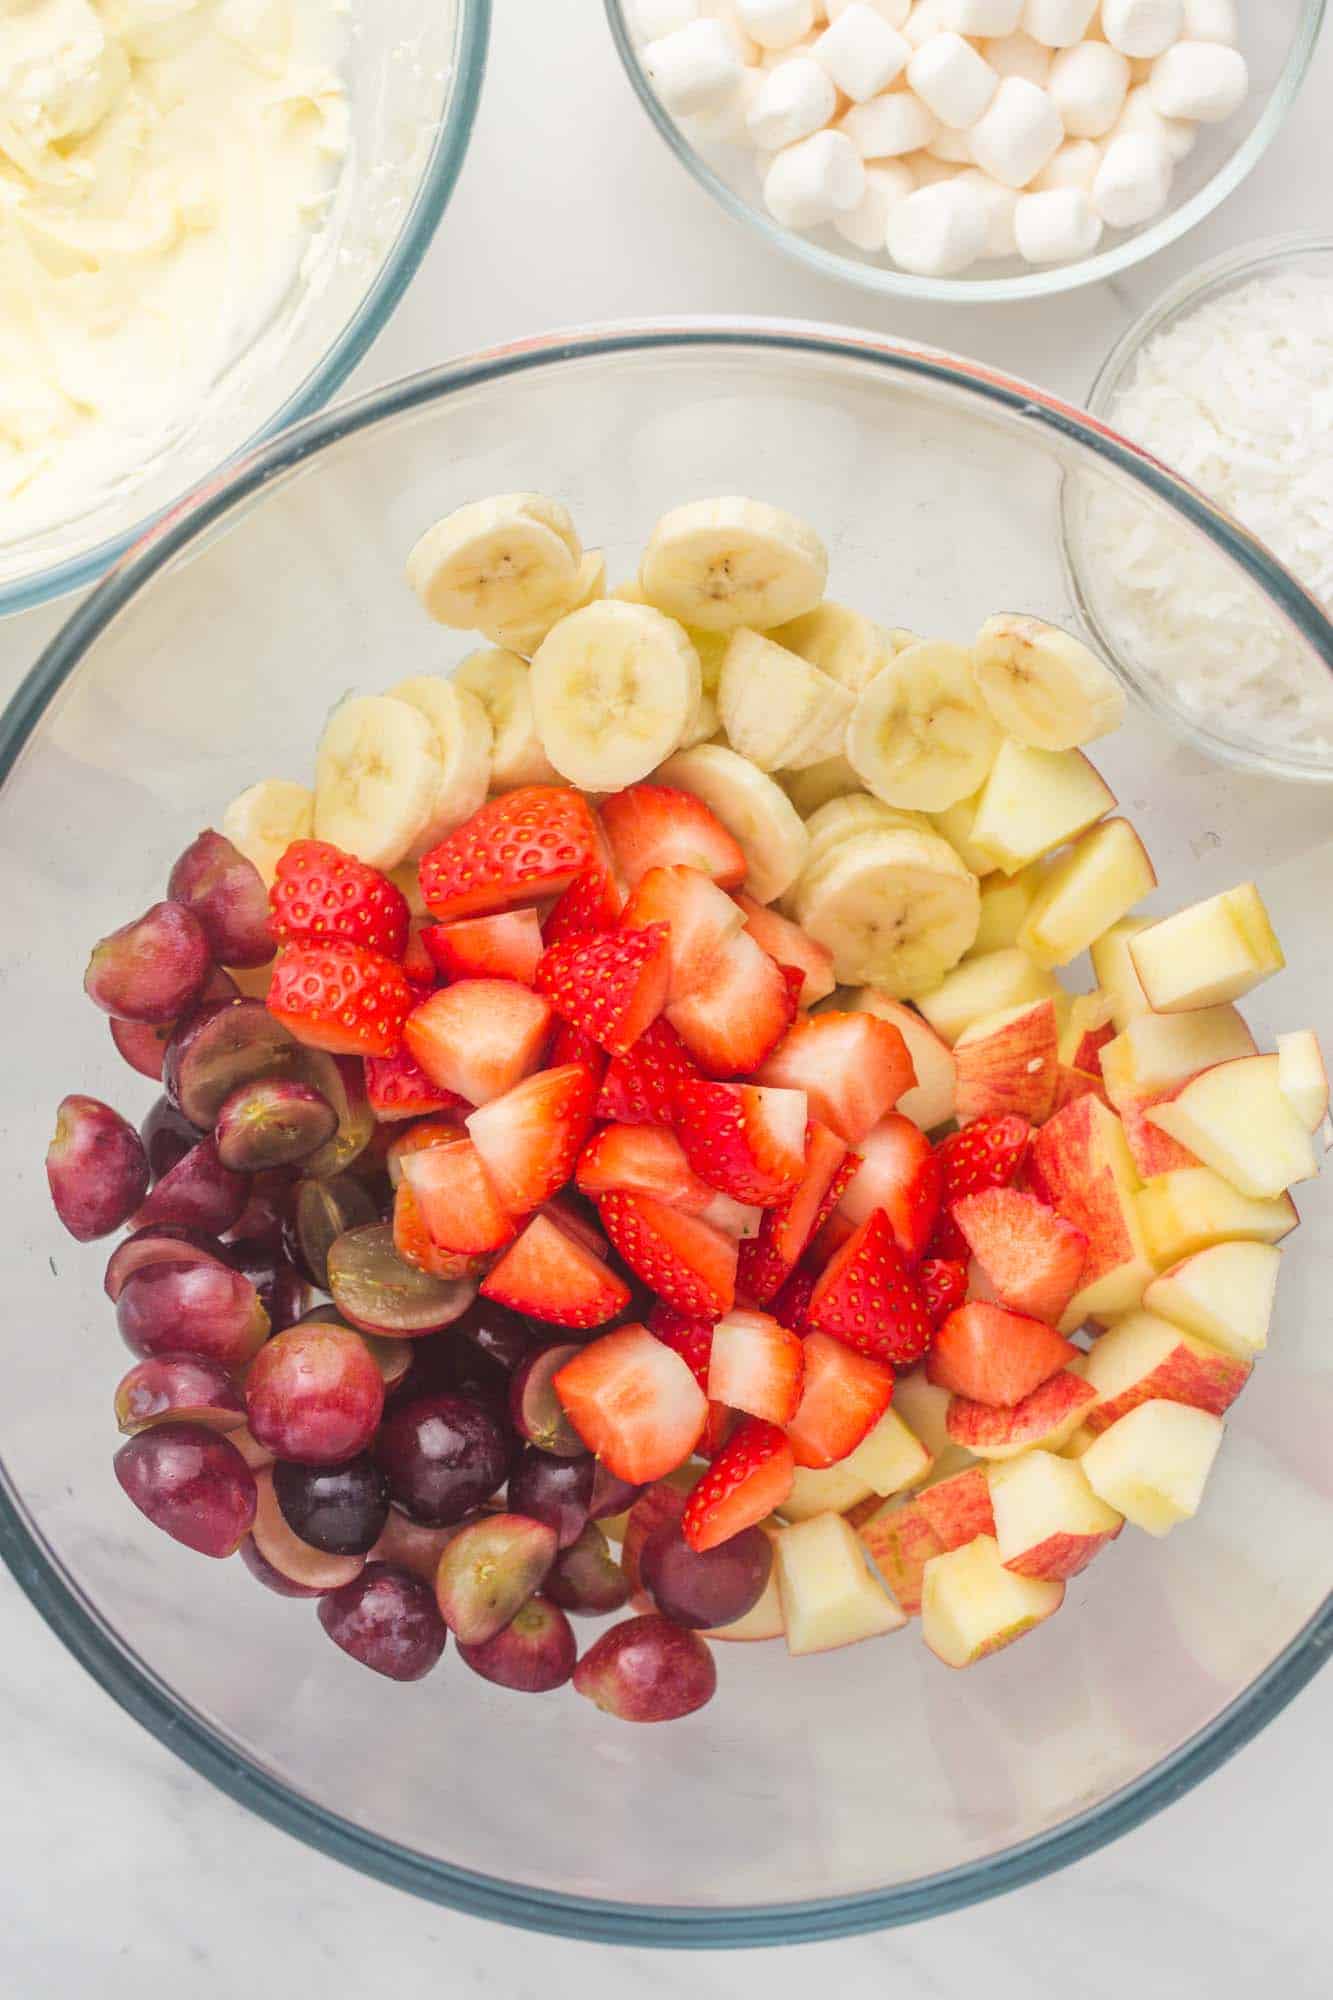 a clear bowl filled with mixed cut fruit including strawberries, grapes, and bananas